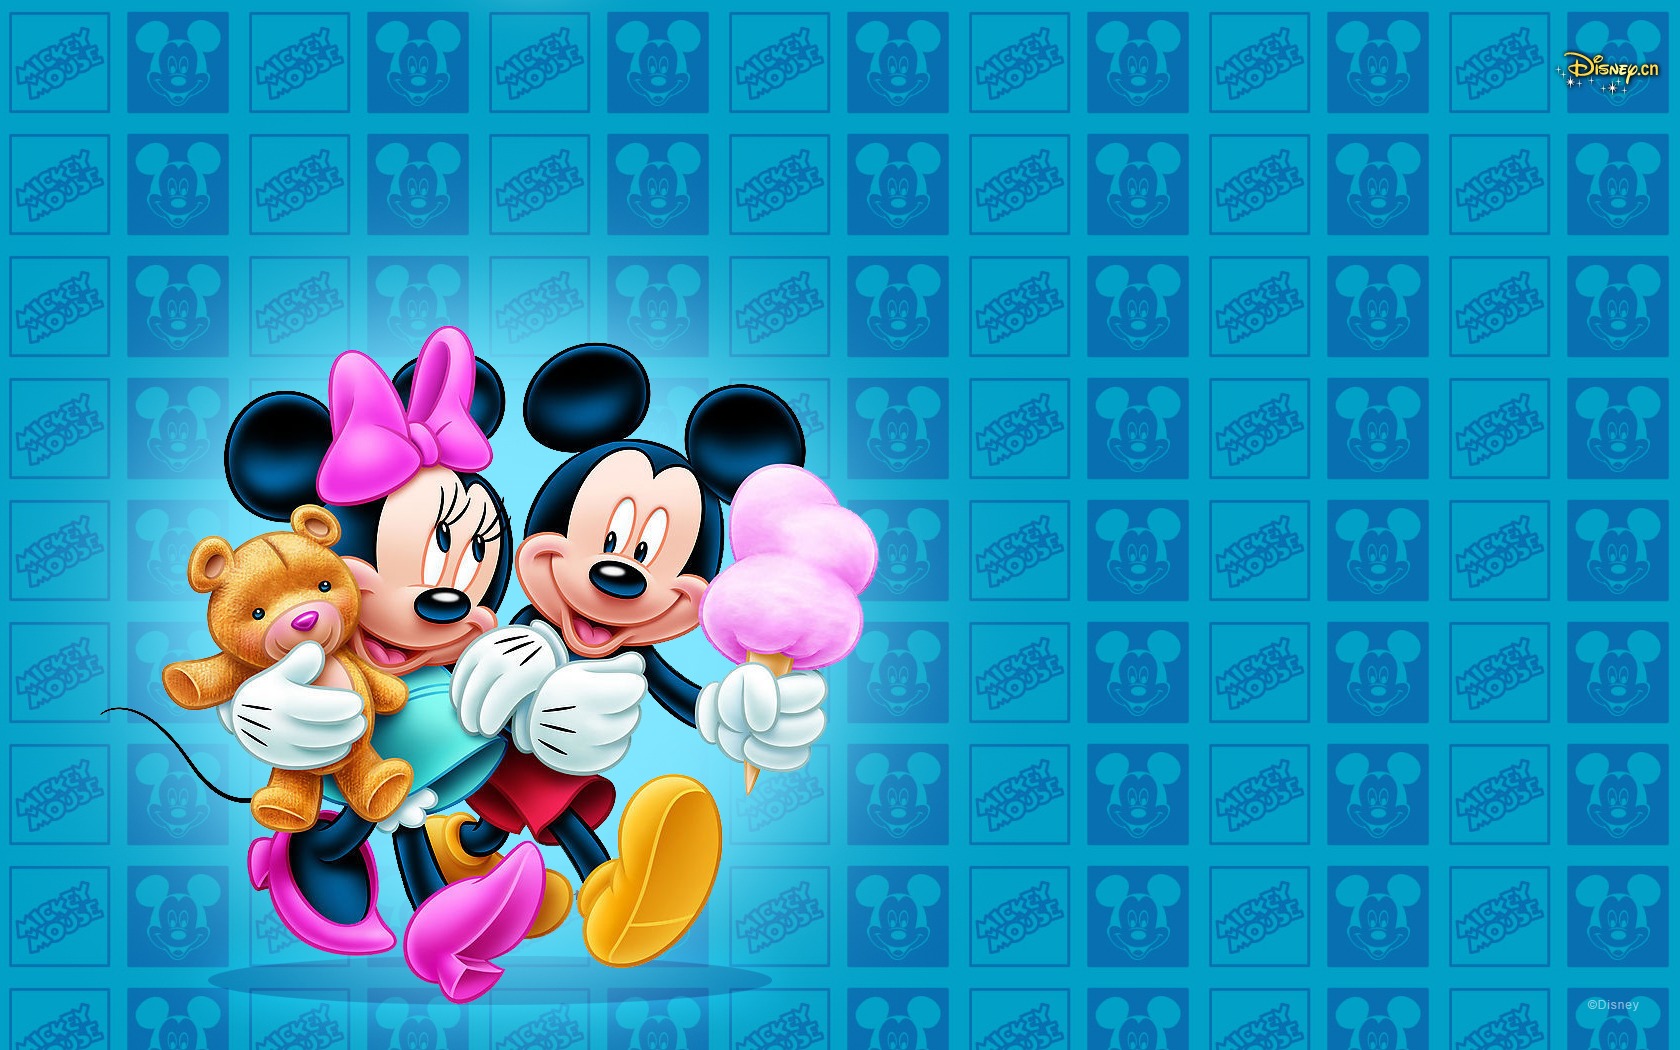 New Mickey background Mickey Mouse wallpapers